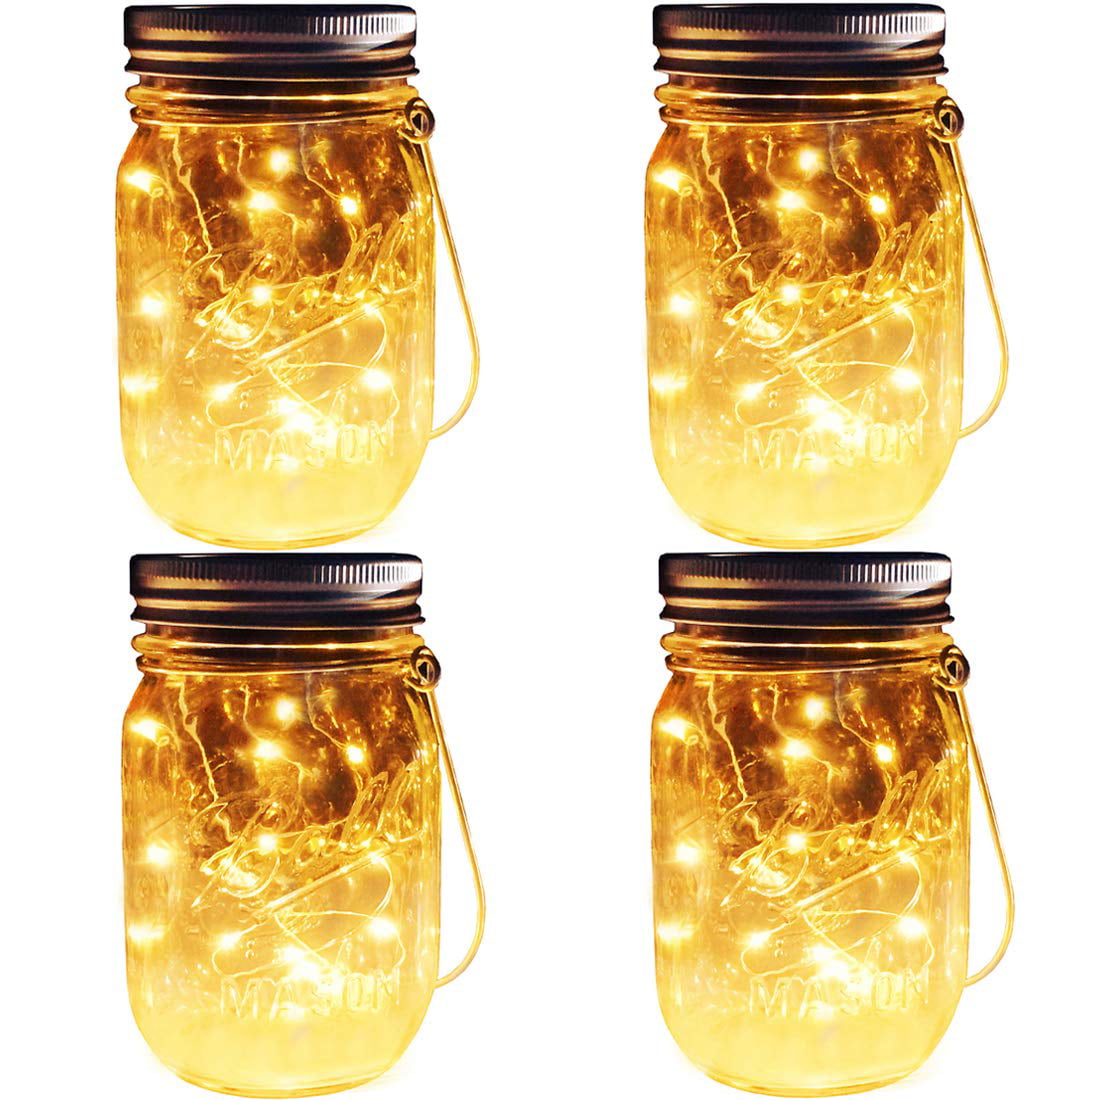 YITING Upgraded Solar Mason Jar Lights 10 Pack 30 LED Fairy Star Firefly String Lids Lights Including 10 pcs Hangers for Patio Yard Garden Wedding Easter Decoration 5Colors 